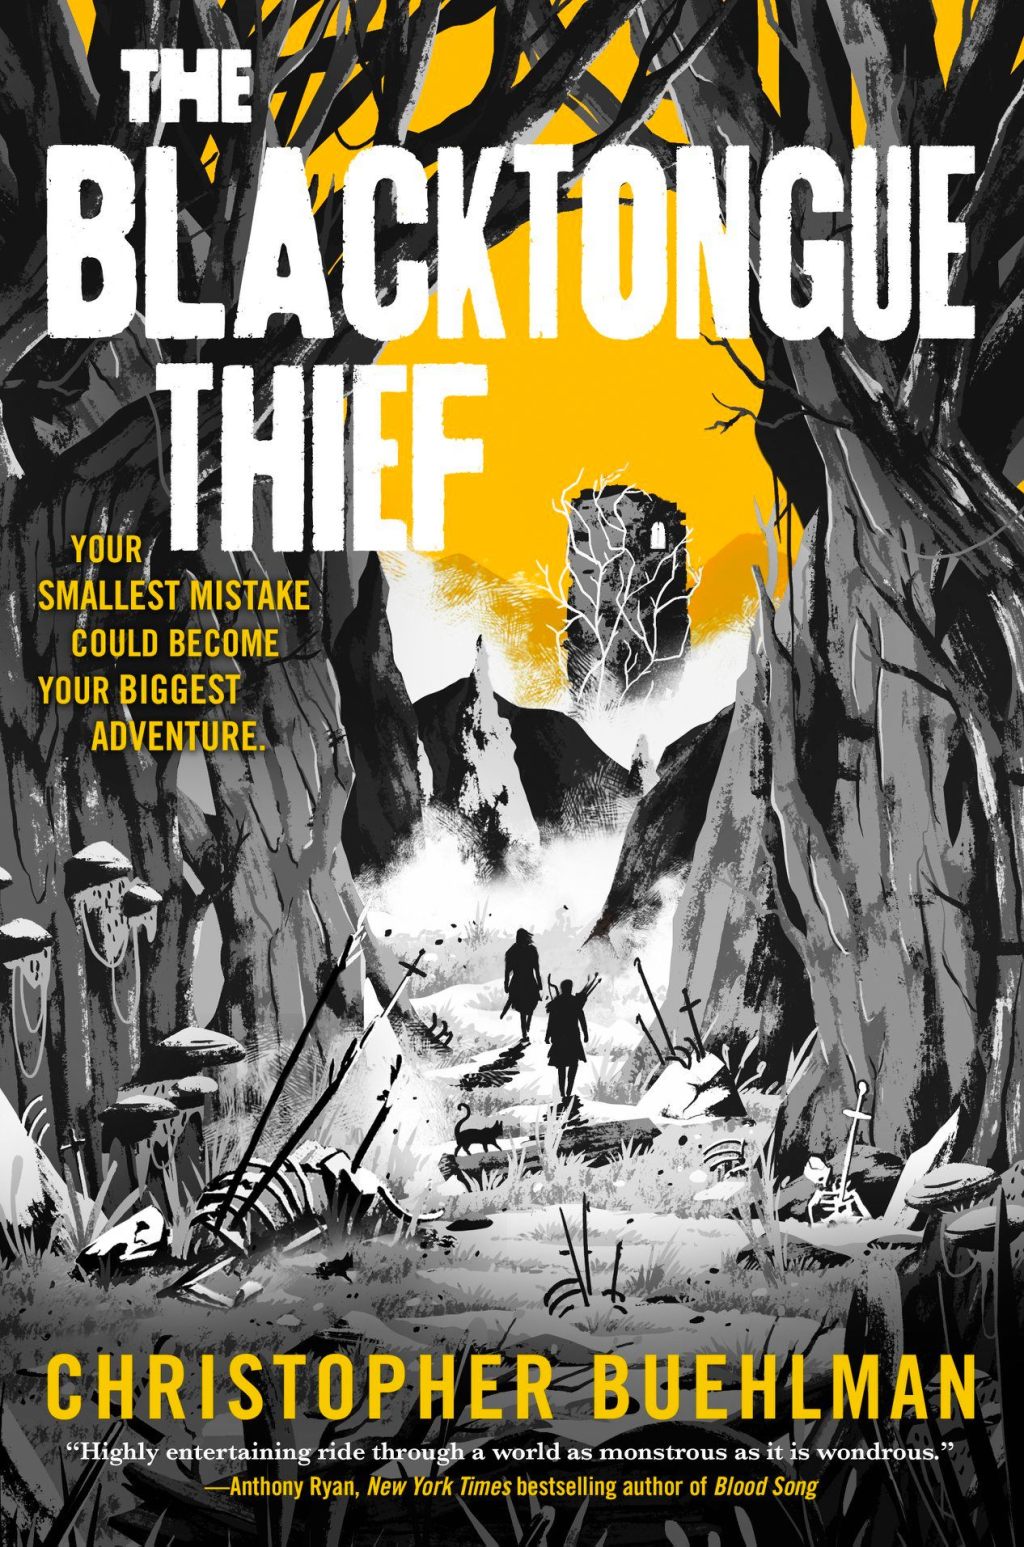 Book Review: The Blacktongue Thief by Christopher Buehlman (fantasy)